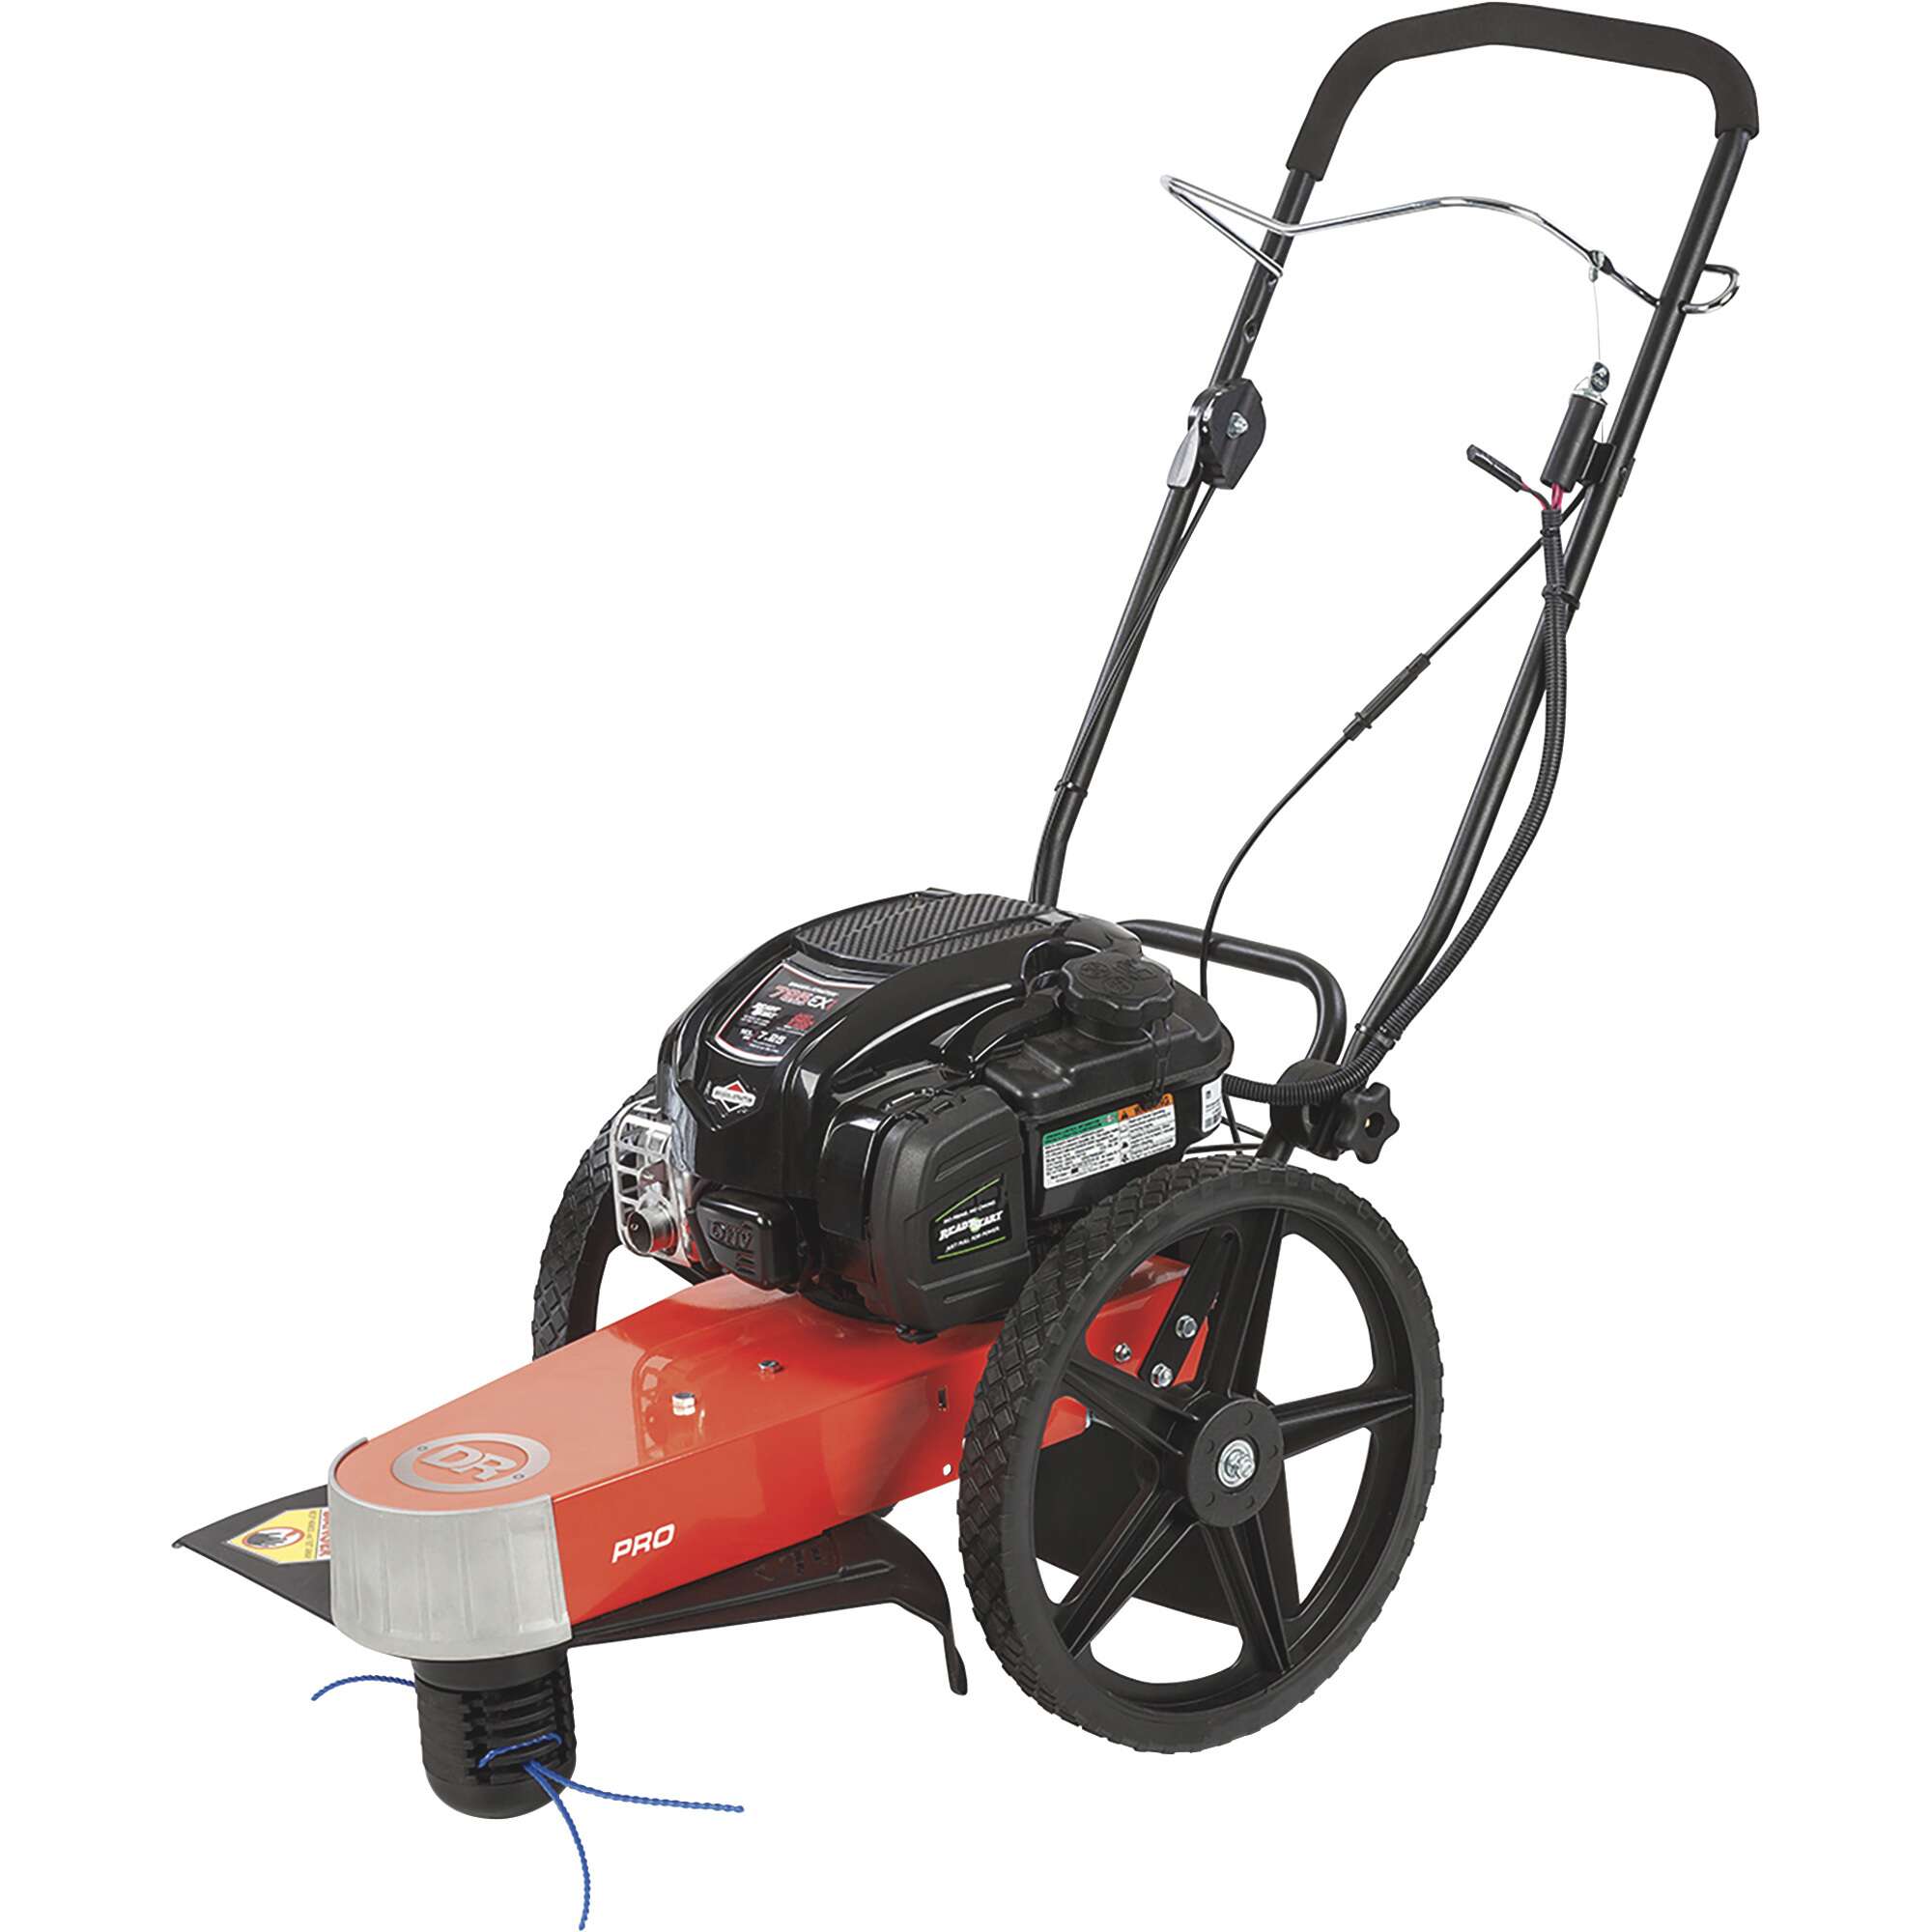 DR Power PRO Trimmer Mower with Electric Start 163cc Briggs & Stratton Engine 22in W